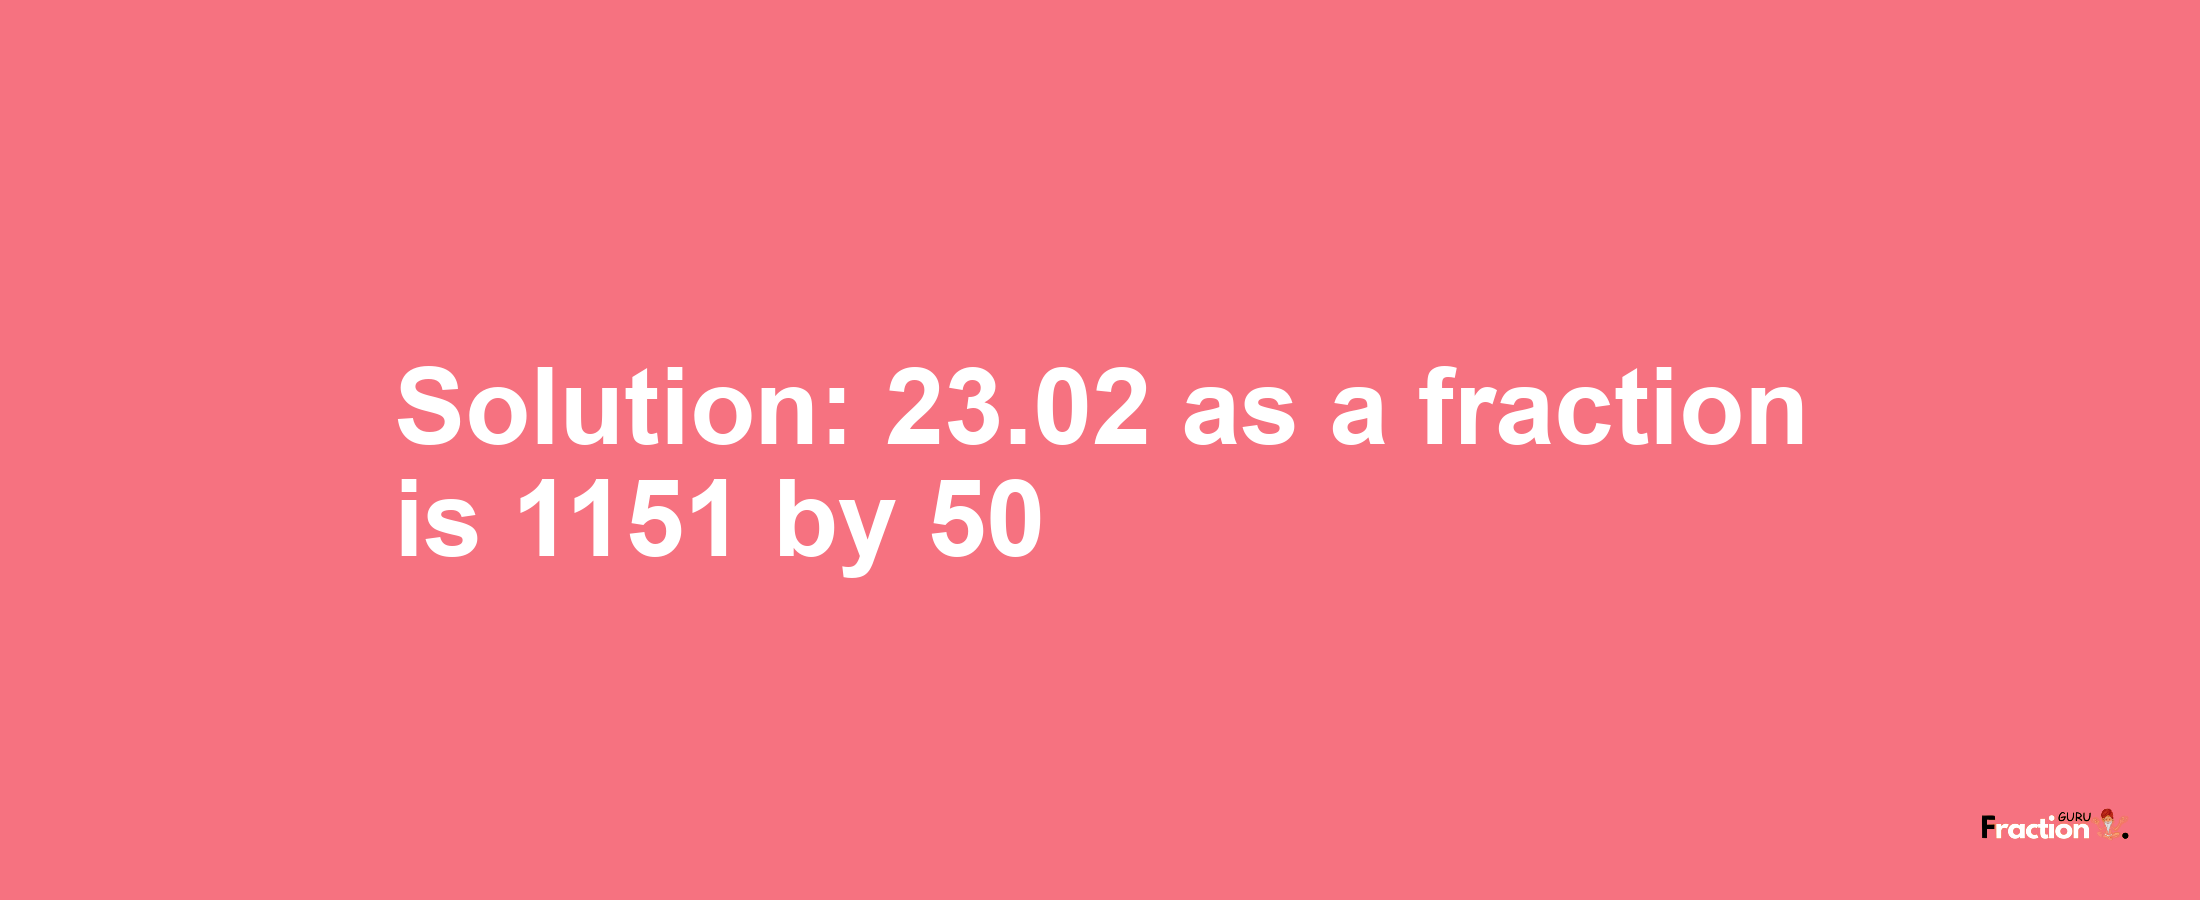 Solution:23.02 as a fraction is 1151/50